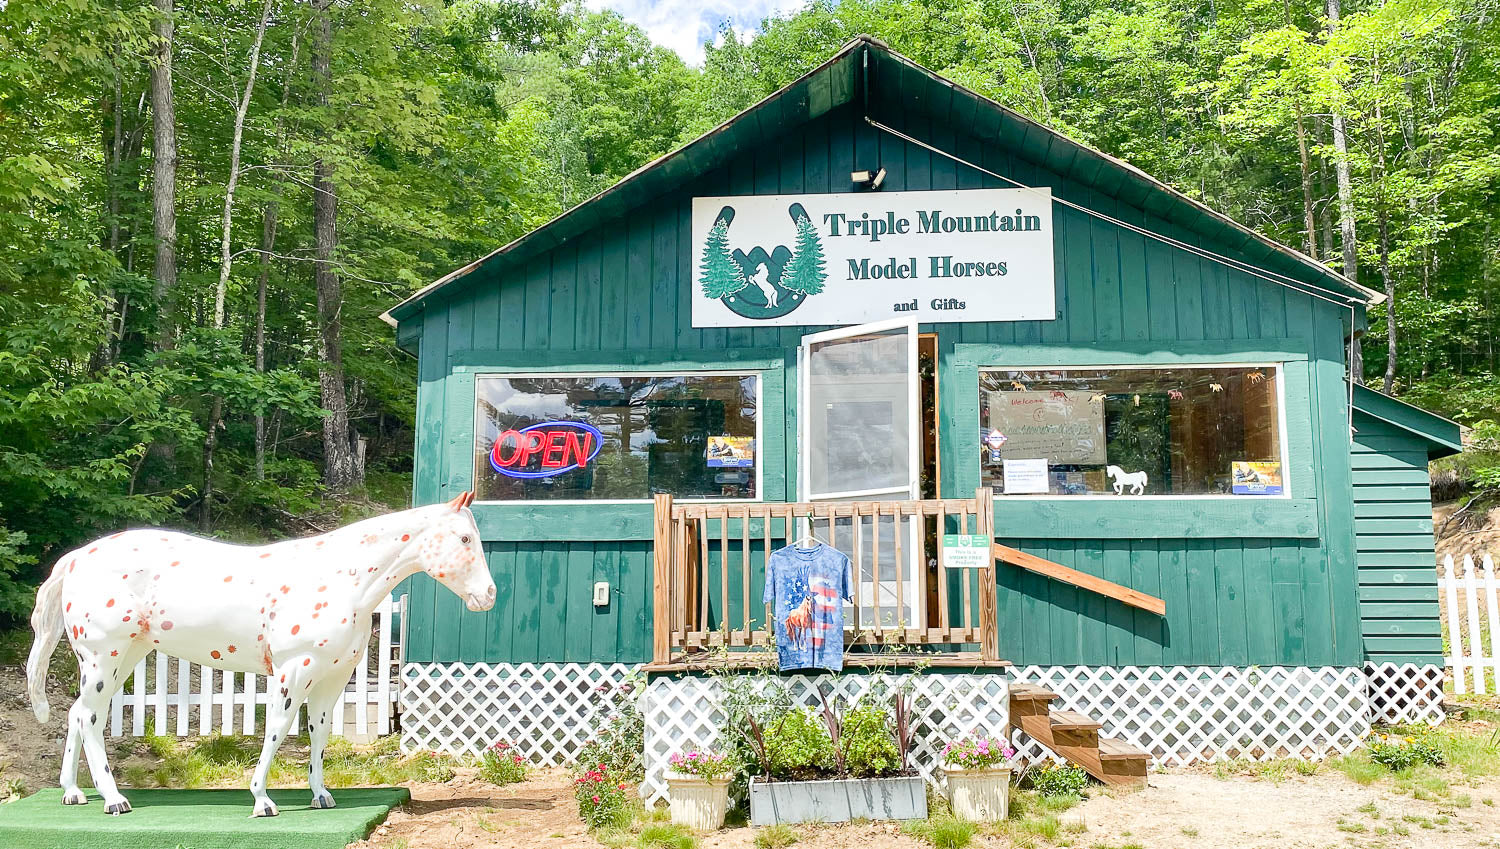 Triple Mountain store with Open sign lit and our mascot Treasure ready to welcome you